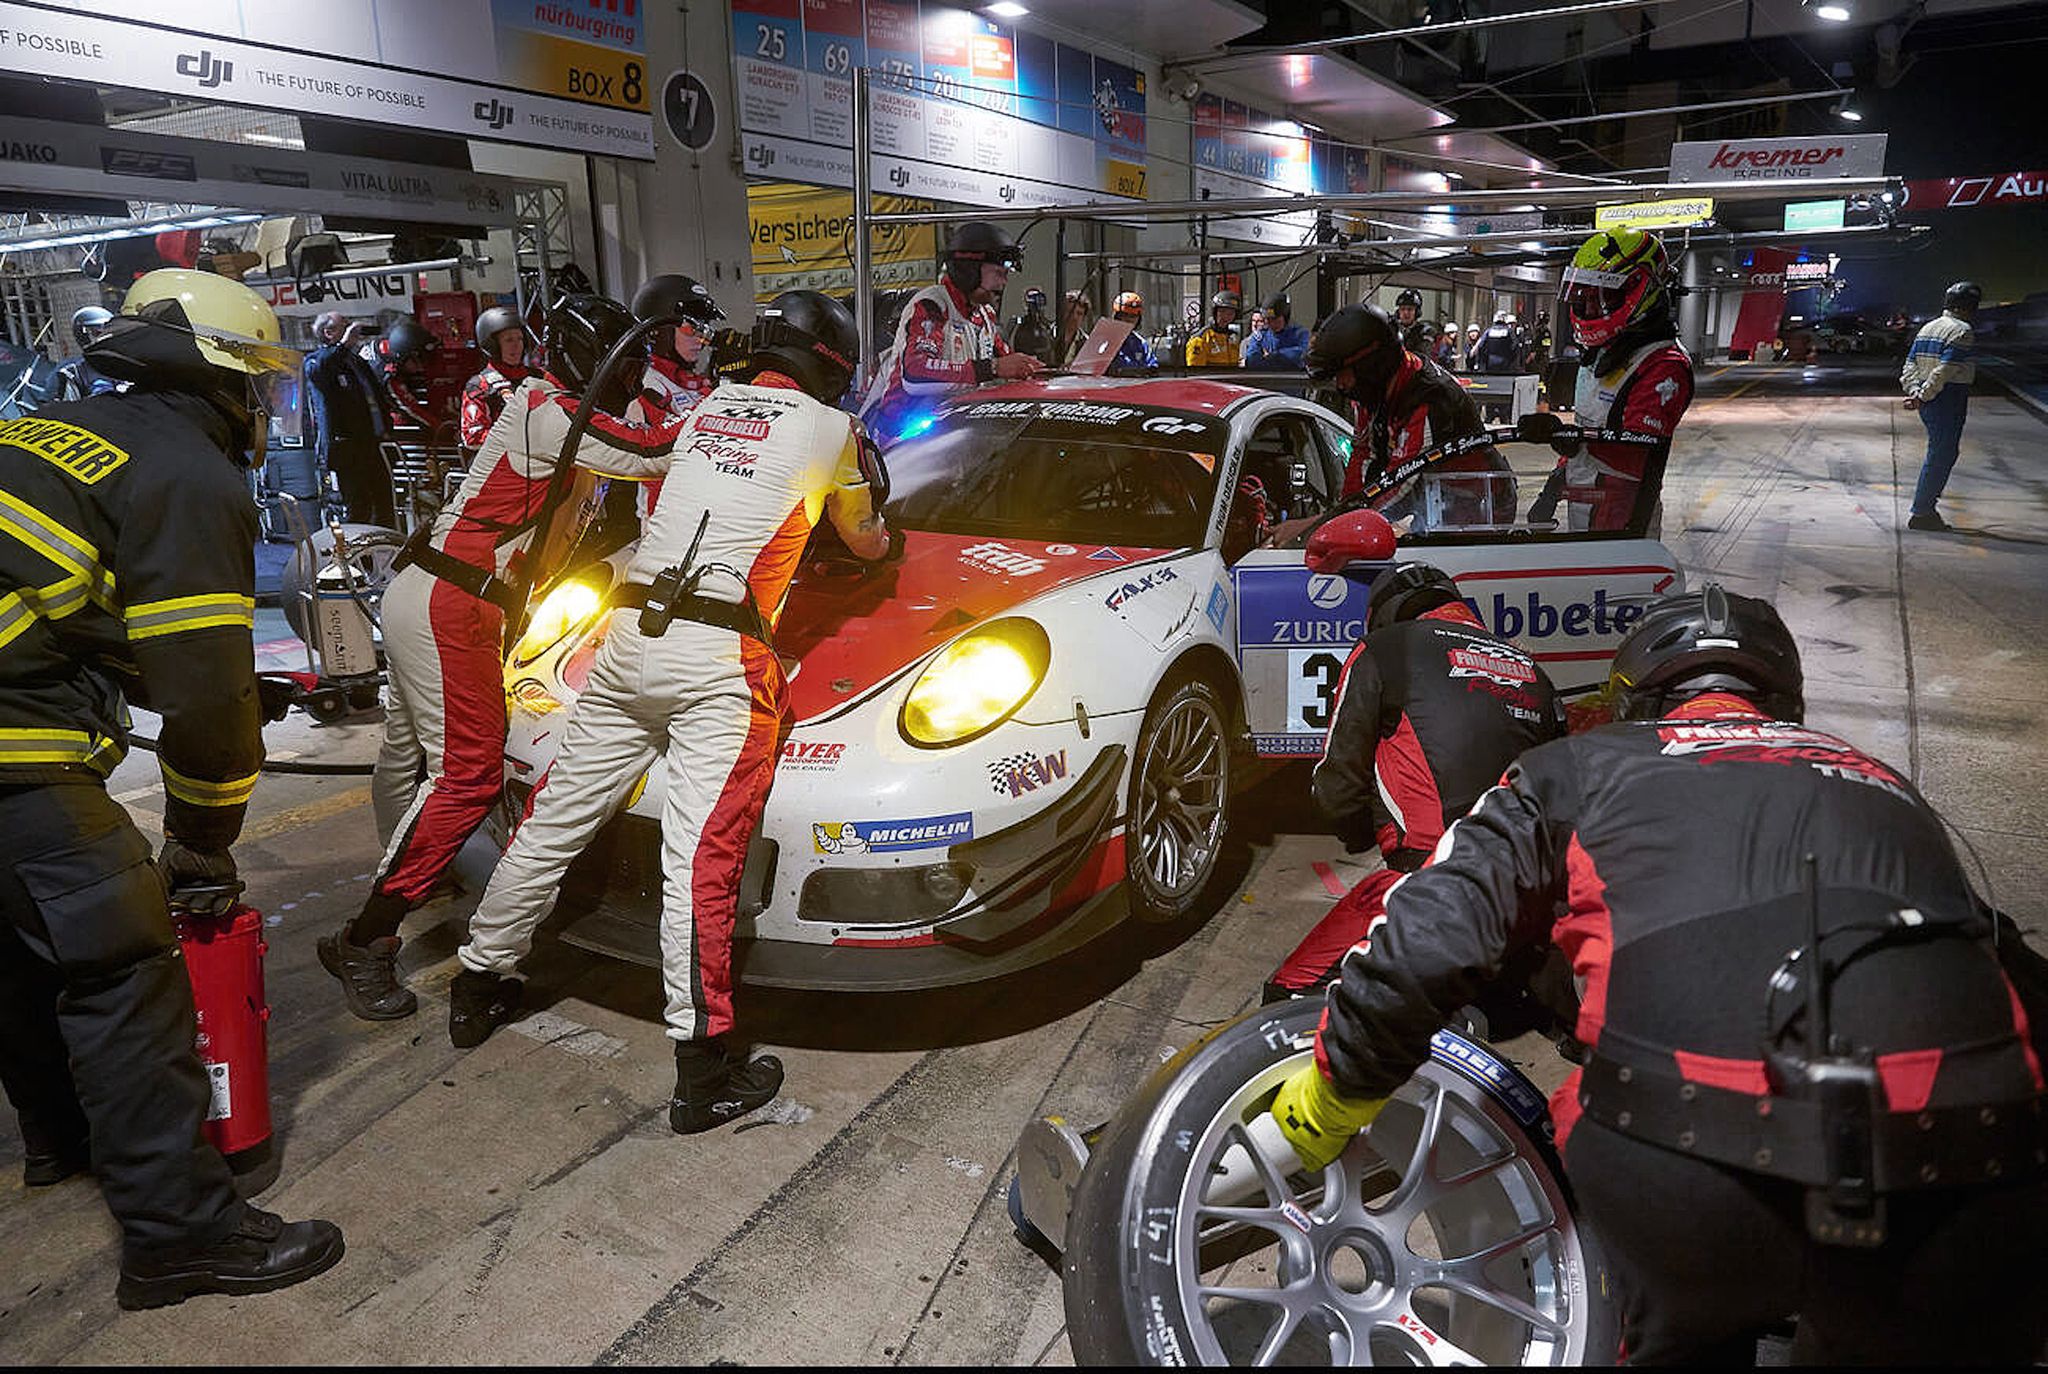 g2ec07 nuerburg, germany 29th may, 2016 the posrsche 991 gt3r of team frikadelli racing with sabine schmitz, klaus abbelen, patrick huismann and norbert siedler during a pit stop during the 24h race at nuerburgring in nuerburg, germany, 29 may 2016 photo thomas freydpaalamy live news